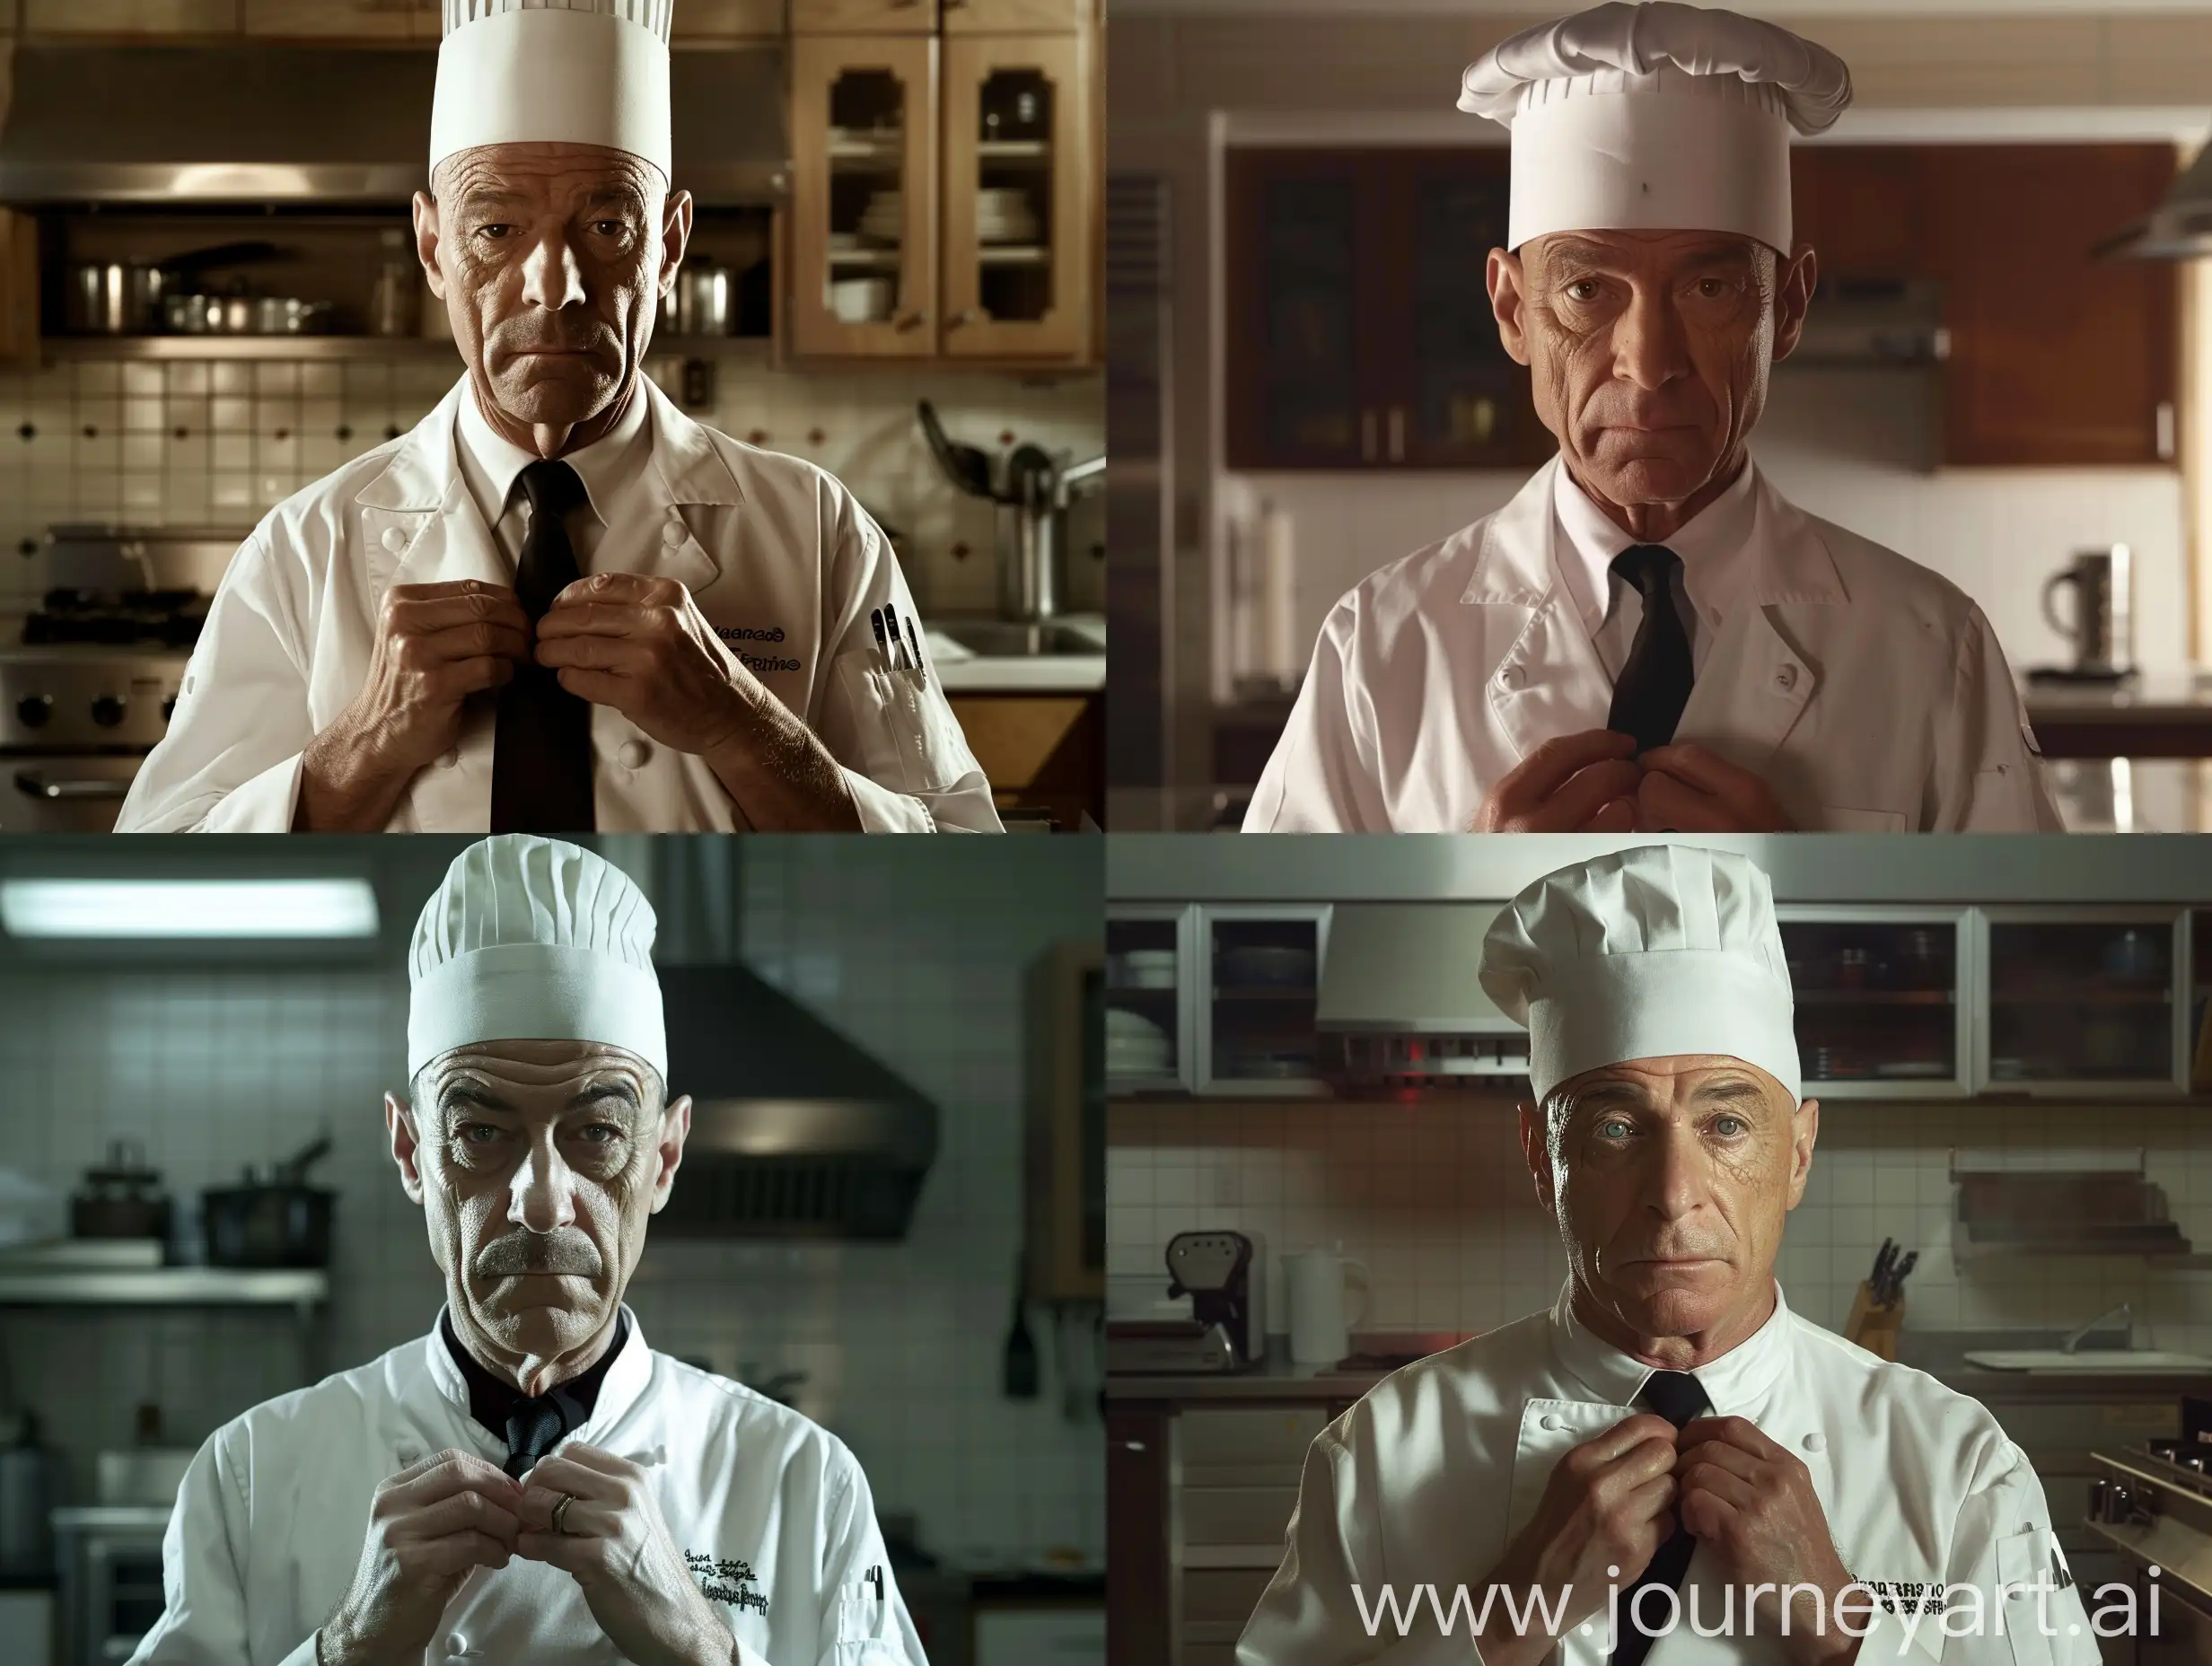 Gustavo Fring (played by Giancarlo Esposito) is in Breaking Bad, Gustavo Fring (played by Giancarlo Esposito) wears a white chef's uniform, Gustavo Fring (played by Giancarlo Esposito) wears a white chef's hat, Gustavo Fring wears a black tie, Gustavo Fring He is trying to fix his tie, the background of the kitchen, the face is very very less happy, modern lighting, clear, realistic,q2